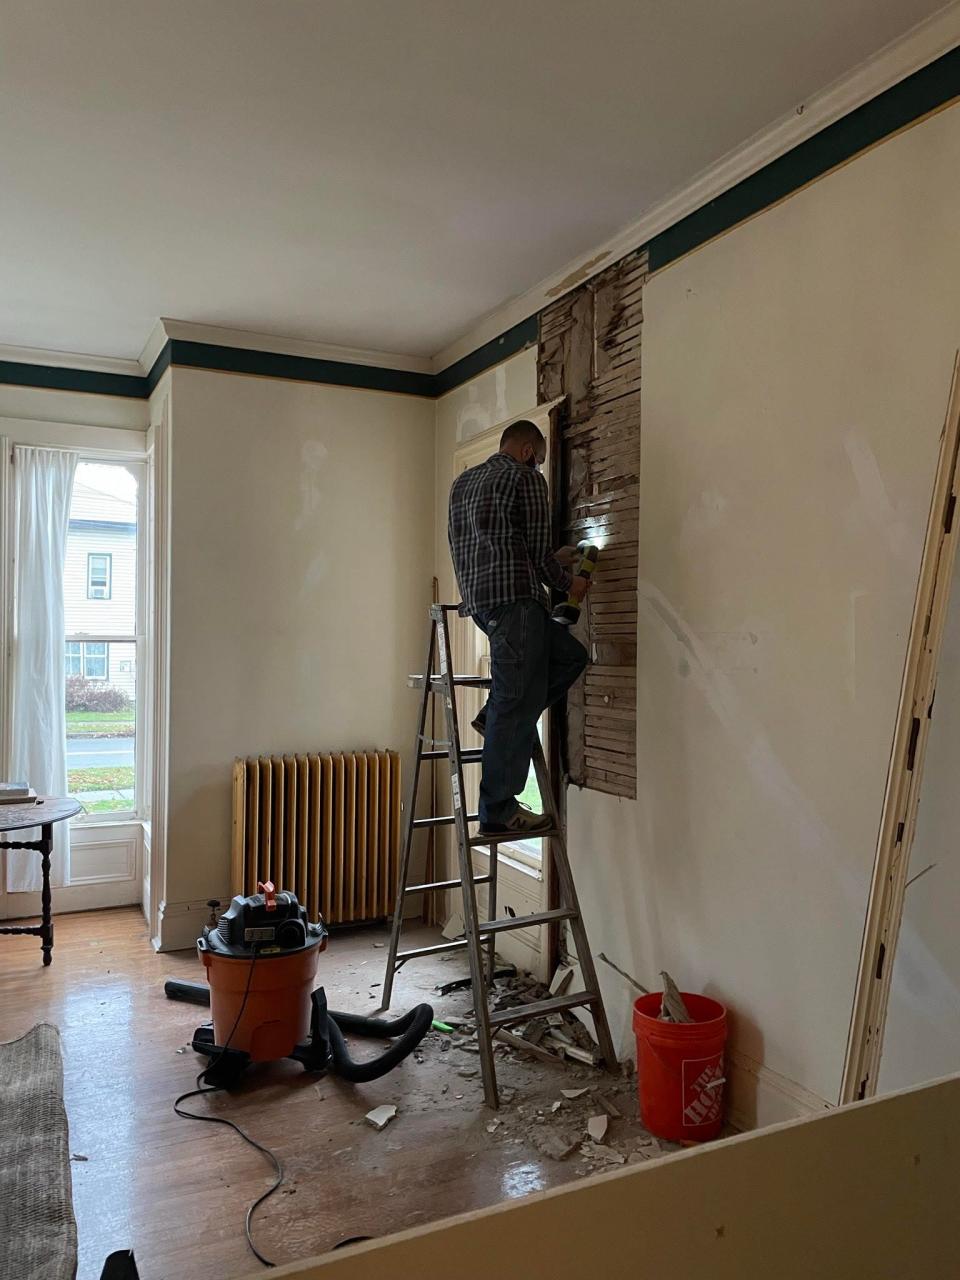 A man works on paneling inside a historic home.